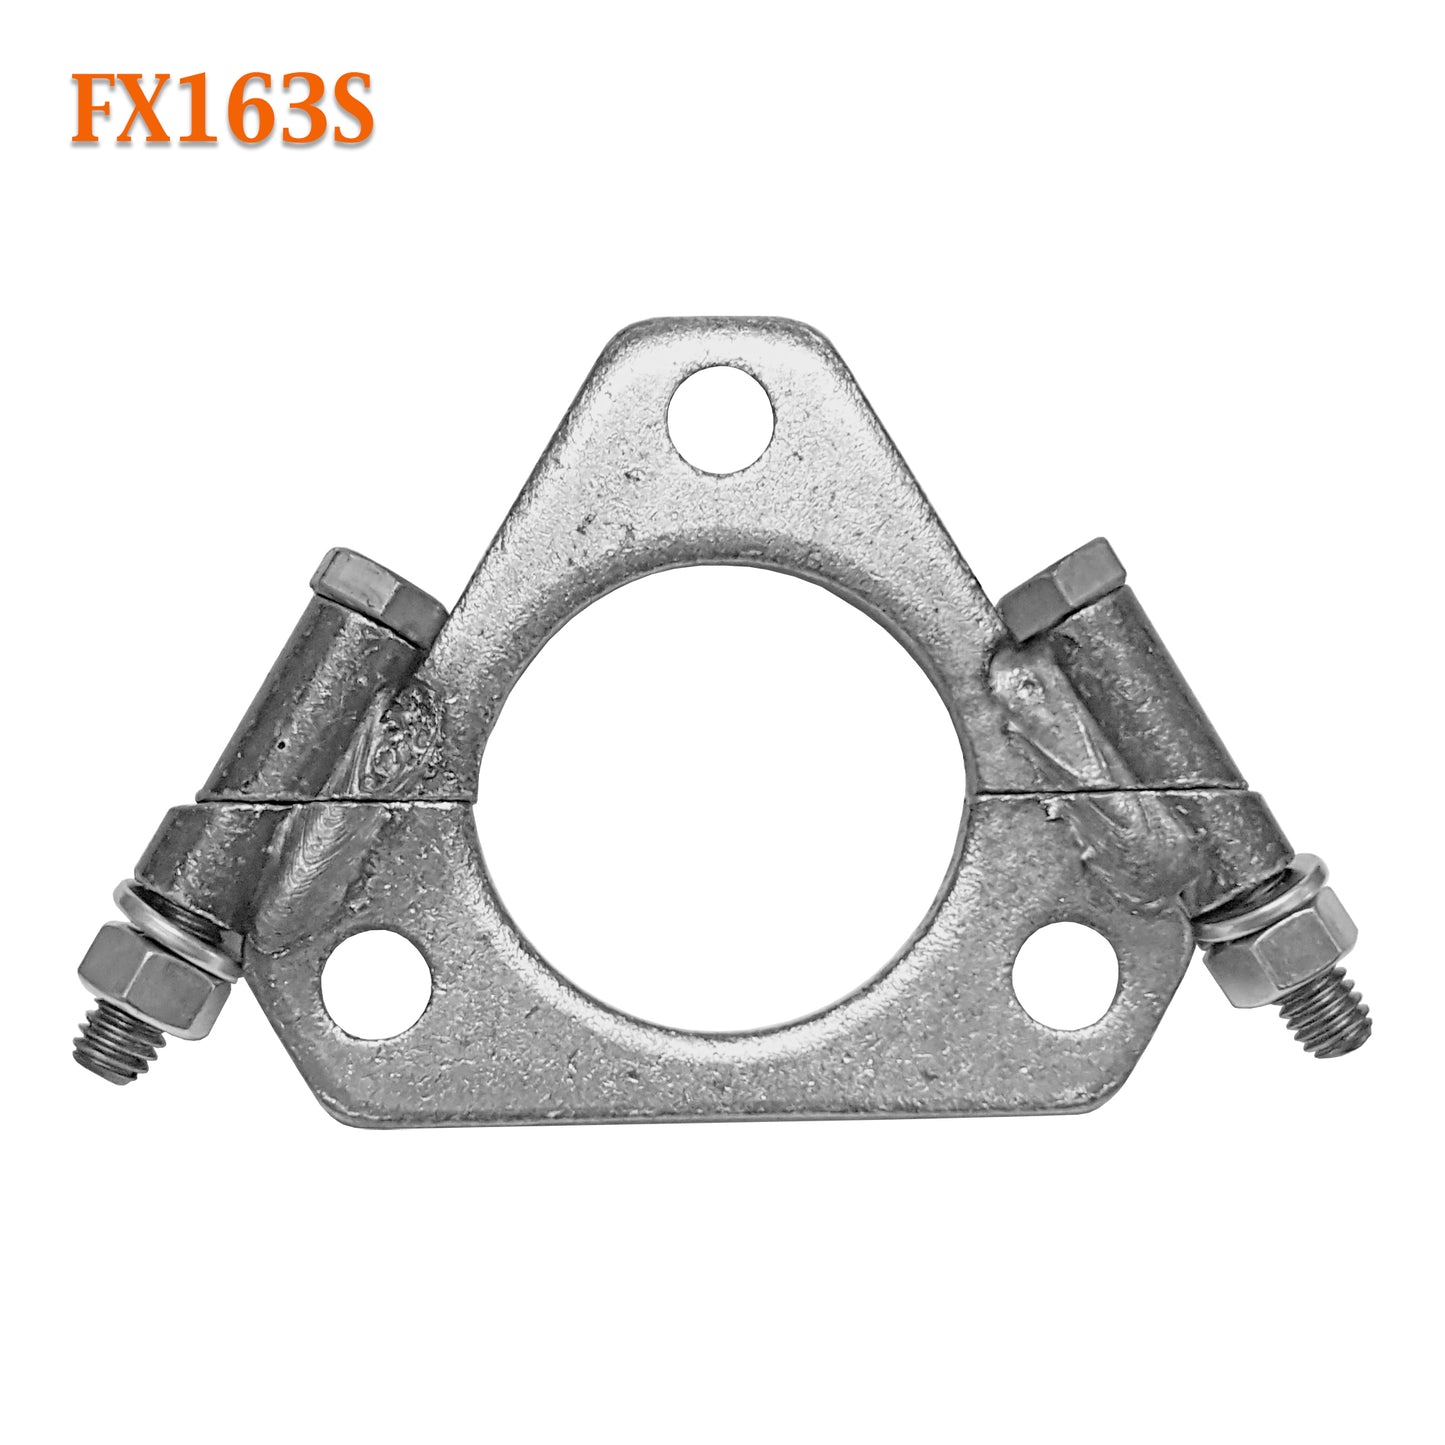 FX163S 1 7/8" 1.875" ID Exhaust Flange Flat Triangle Split Repair Replacement